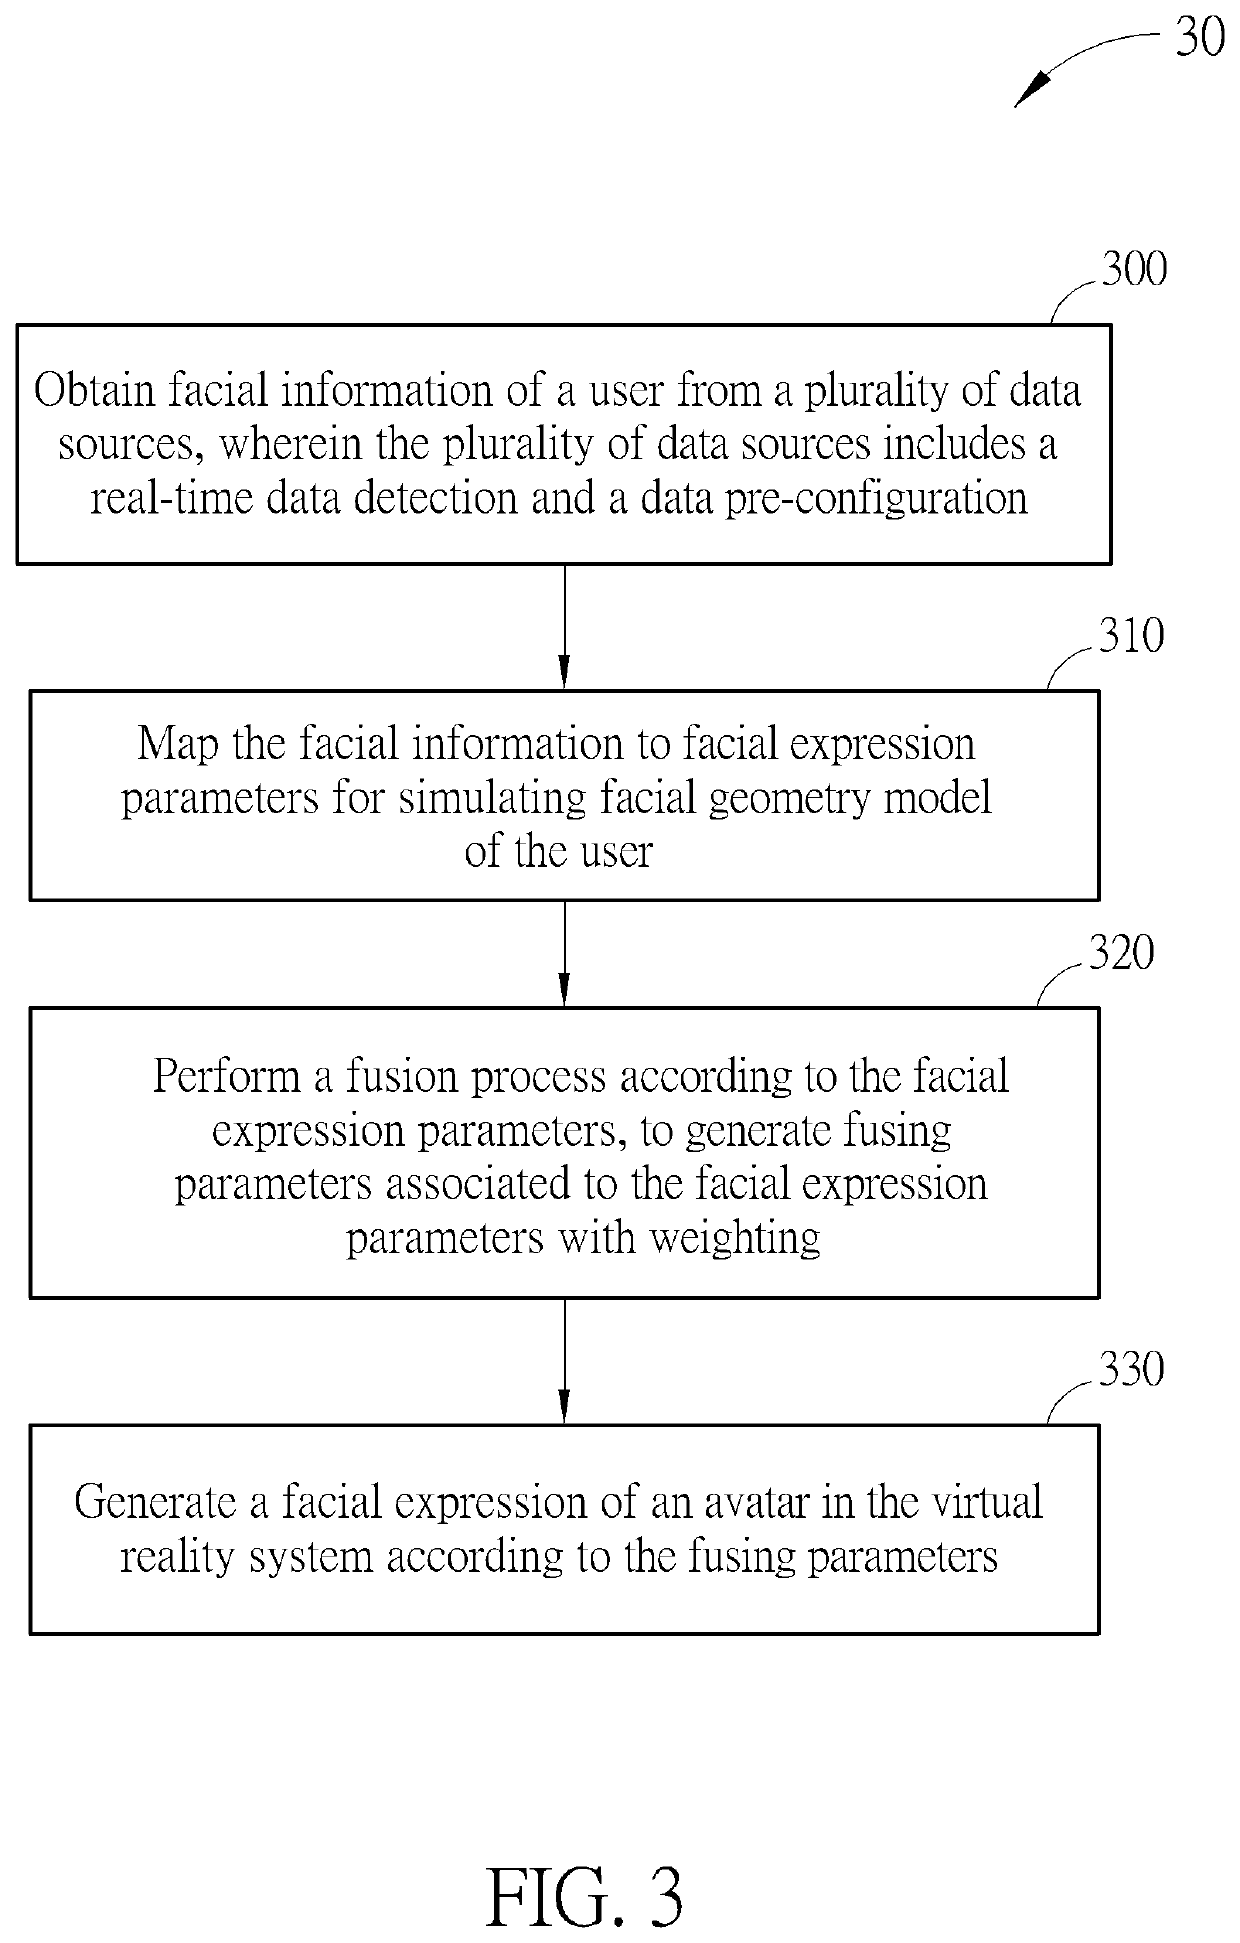 Method of Facial Expression Generation with Data Fusion